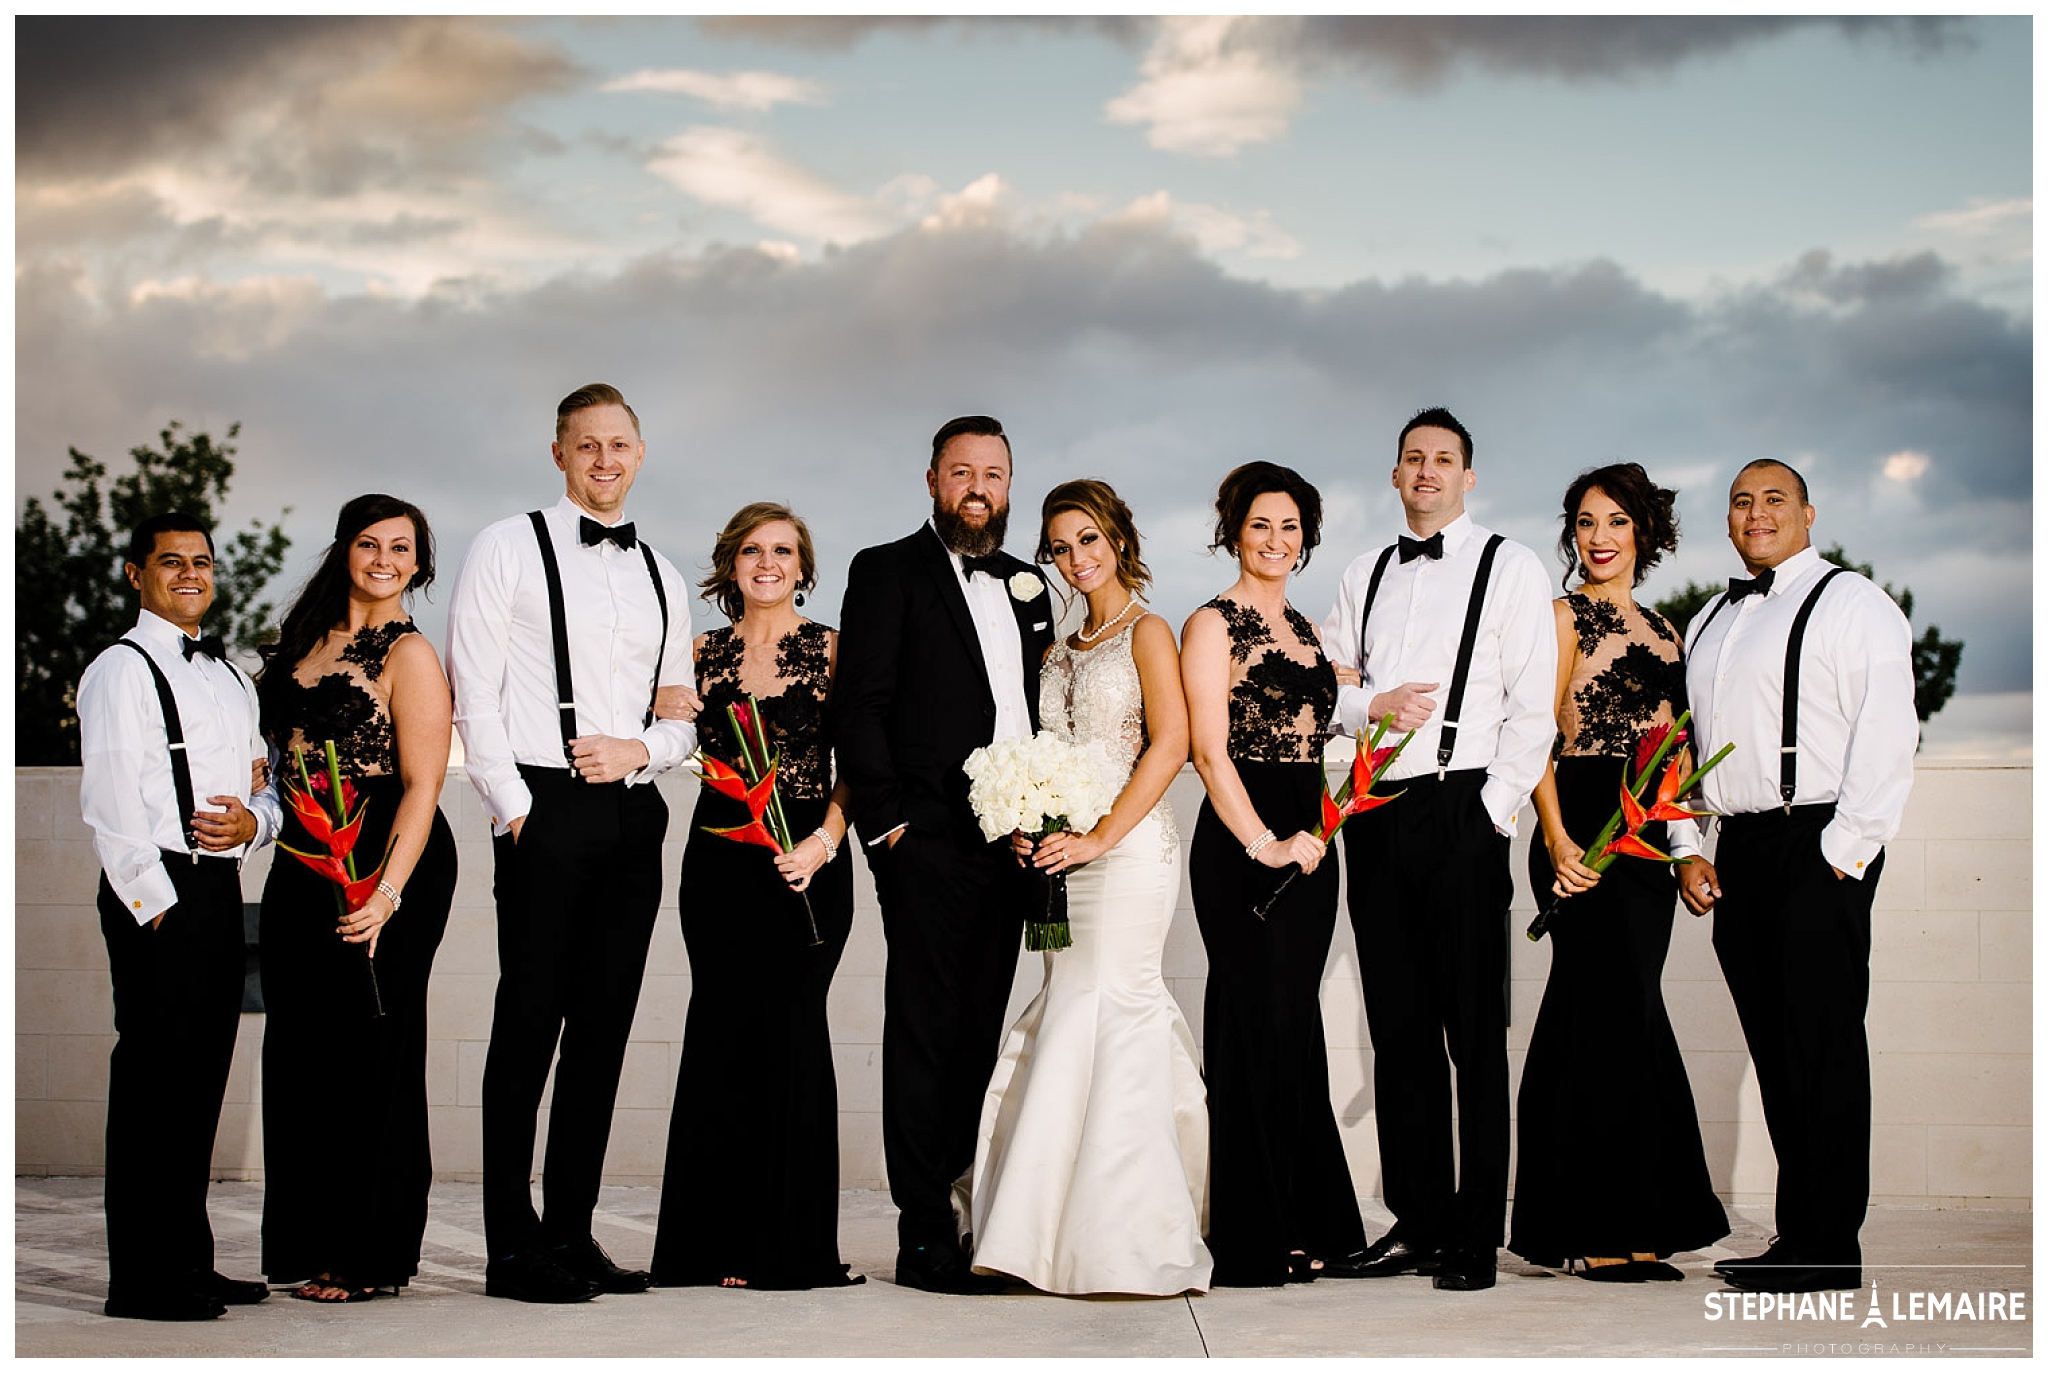 Spencer theater wedding in Ruidoso Bridal party by Stephane Lemaire Photography 